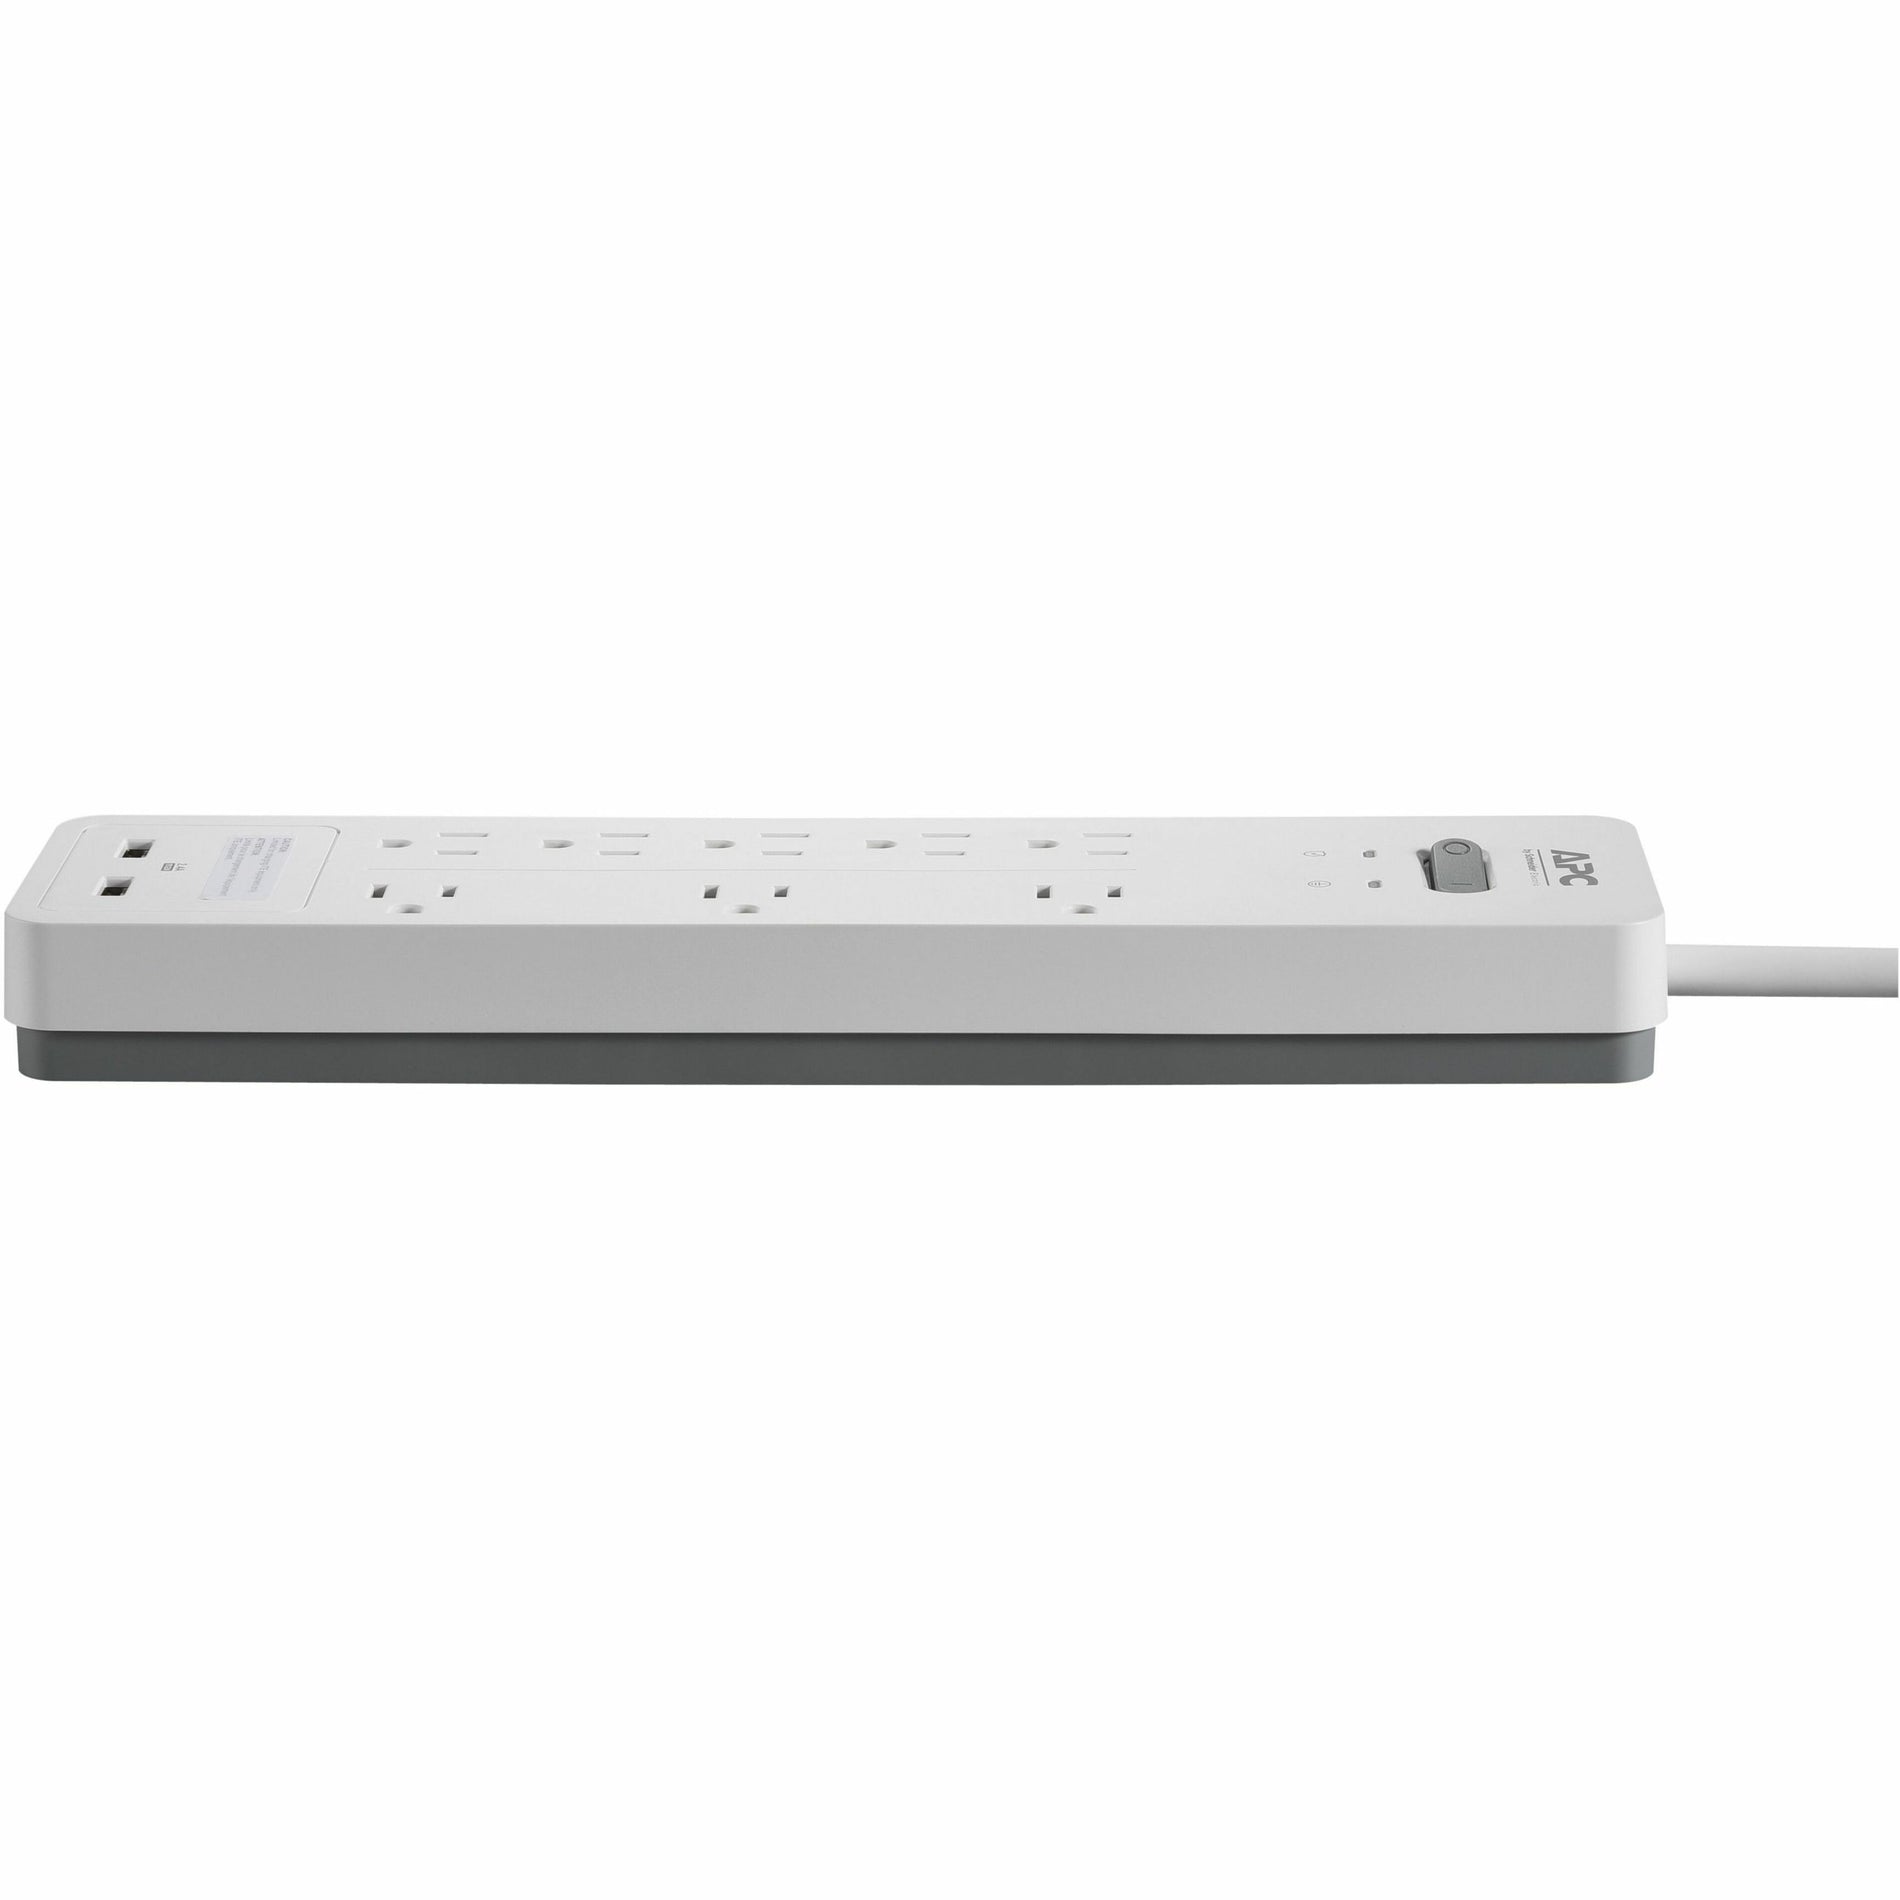 APC PH8U2W SurgeArrest Home/Office 8-Outlet Surge Suppressor/Protector, 2160 J, 2 USB Charging Ports, 120V White [Discontinued]